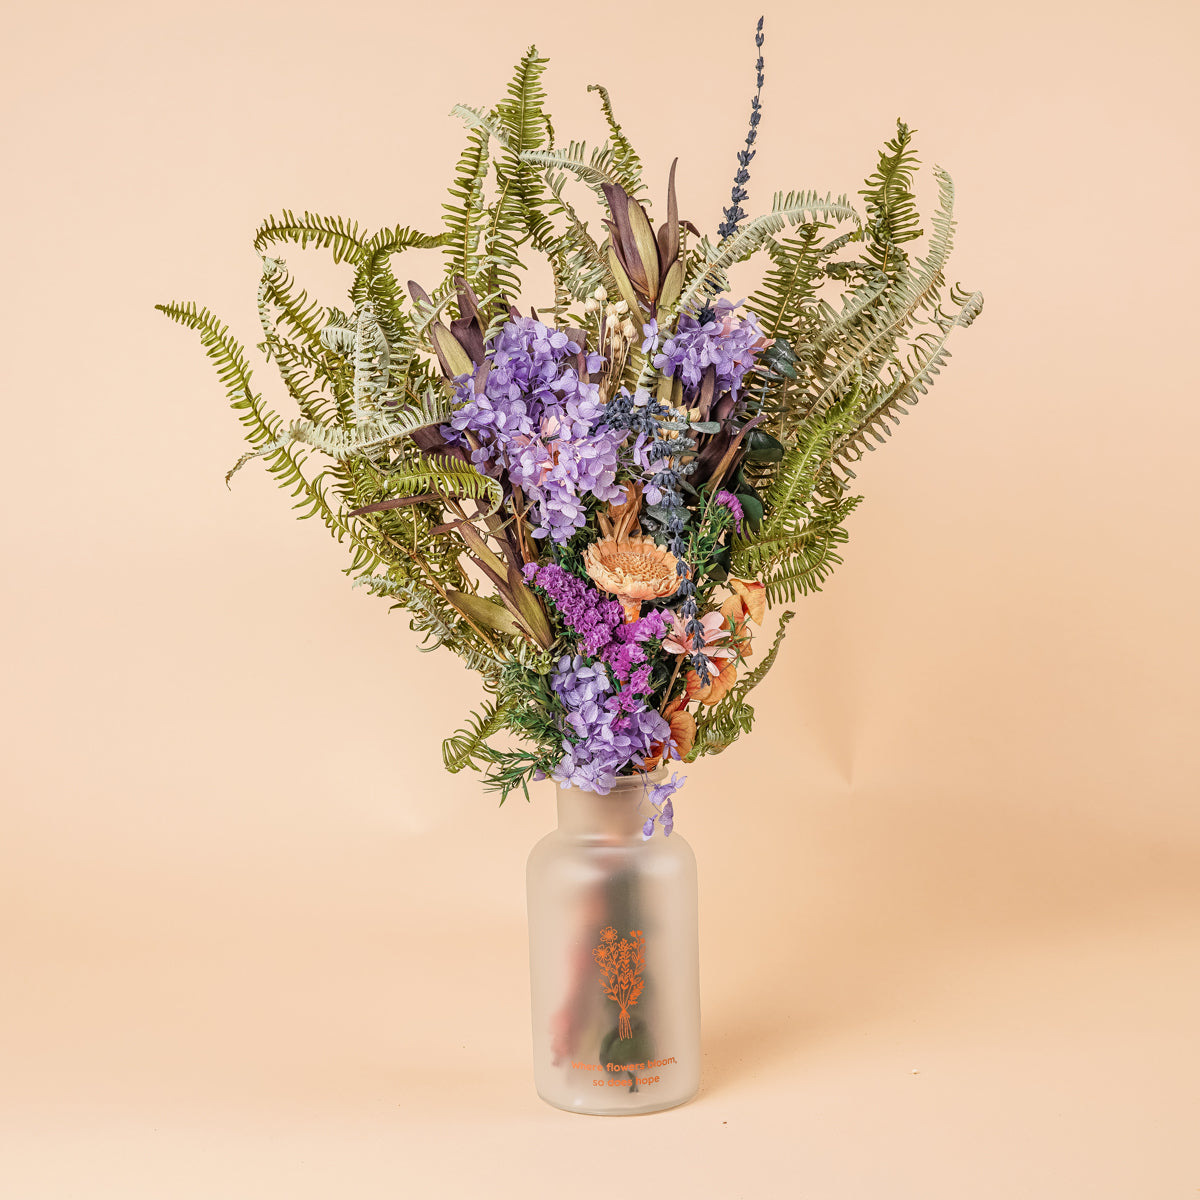 Calypso Scented Preserved Bouquet